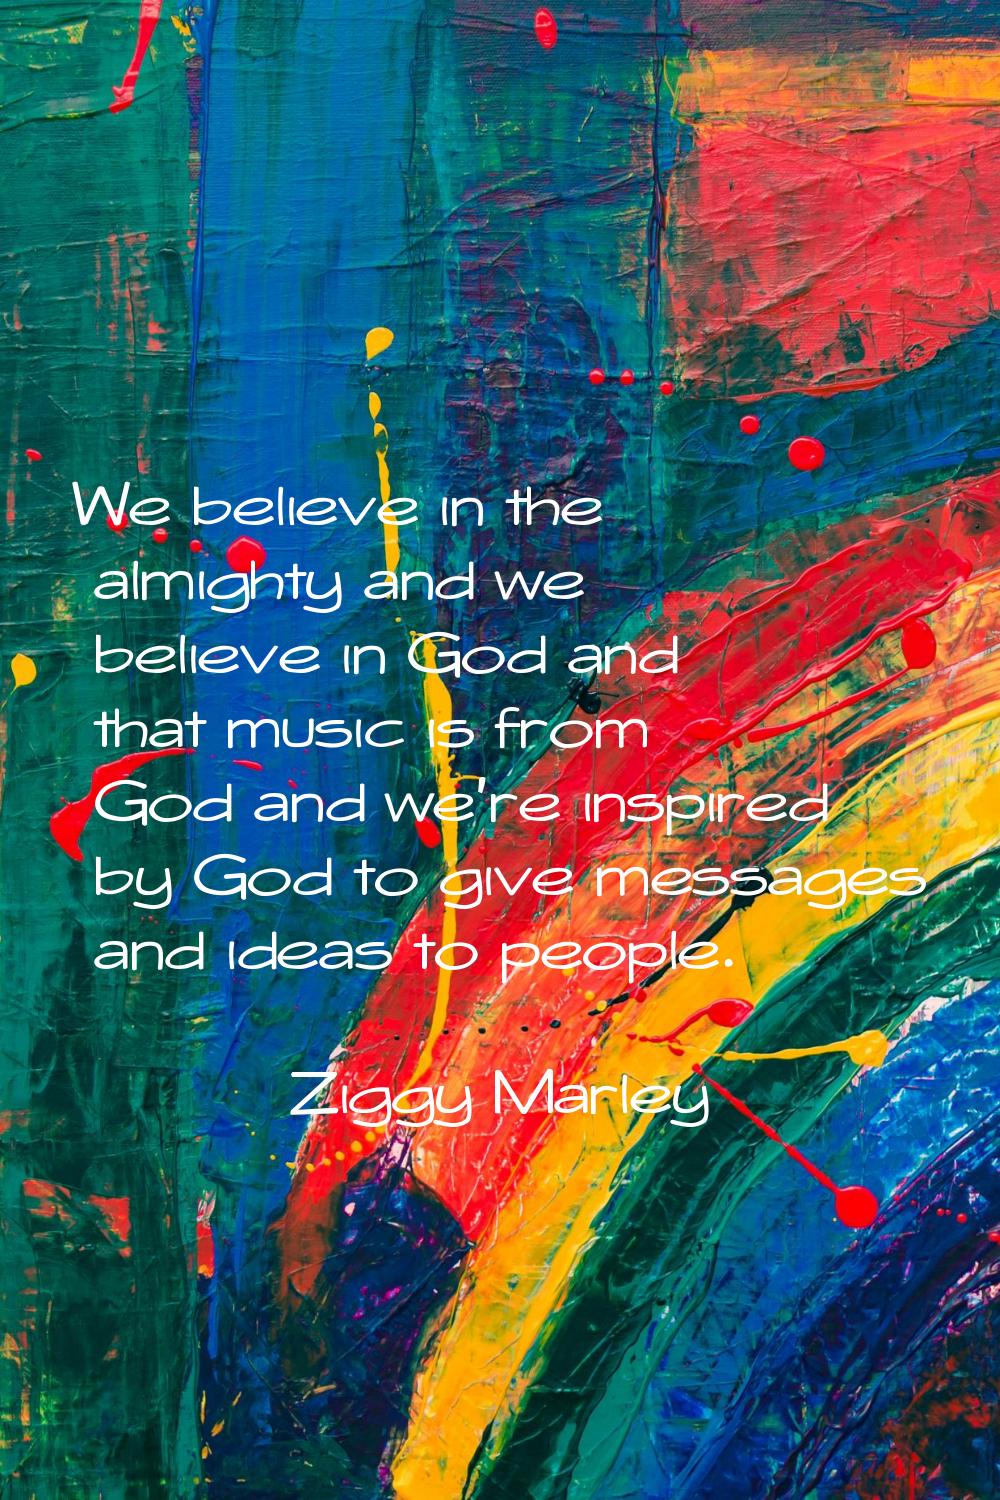 We believe in the almighty and we believe in God and that music is from God and we're inspired by G